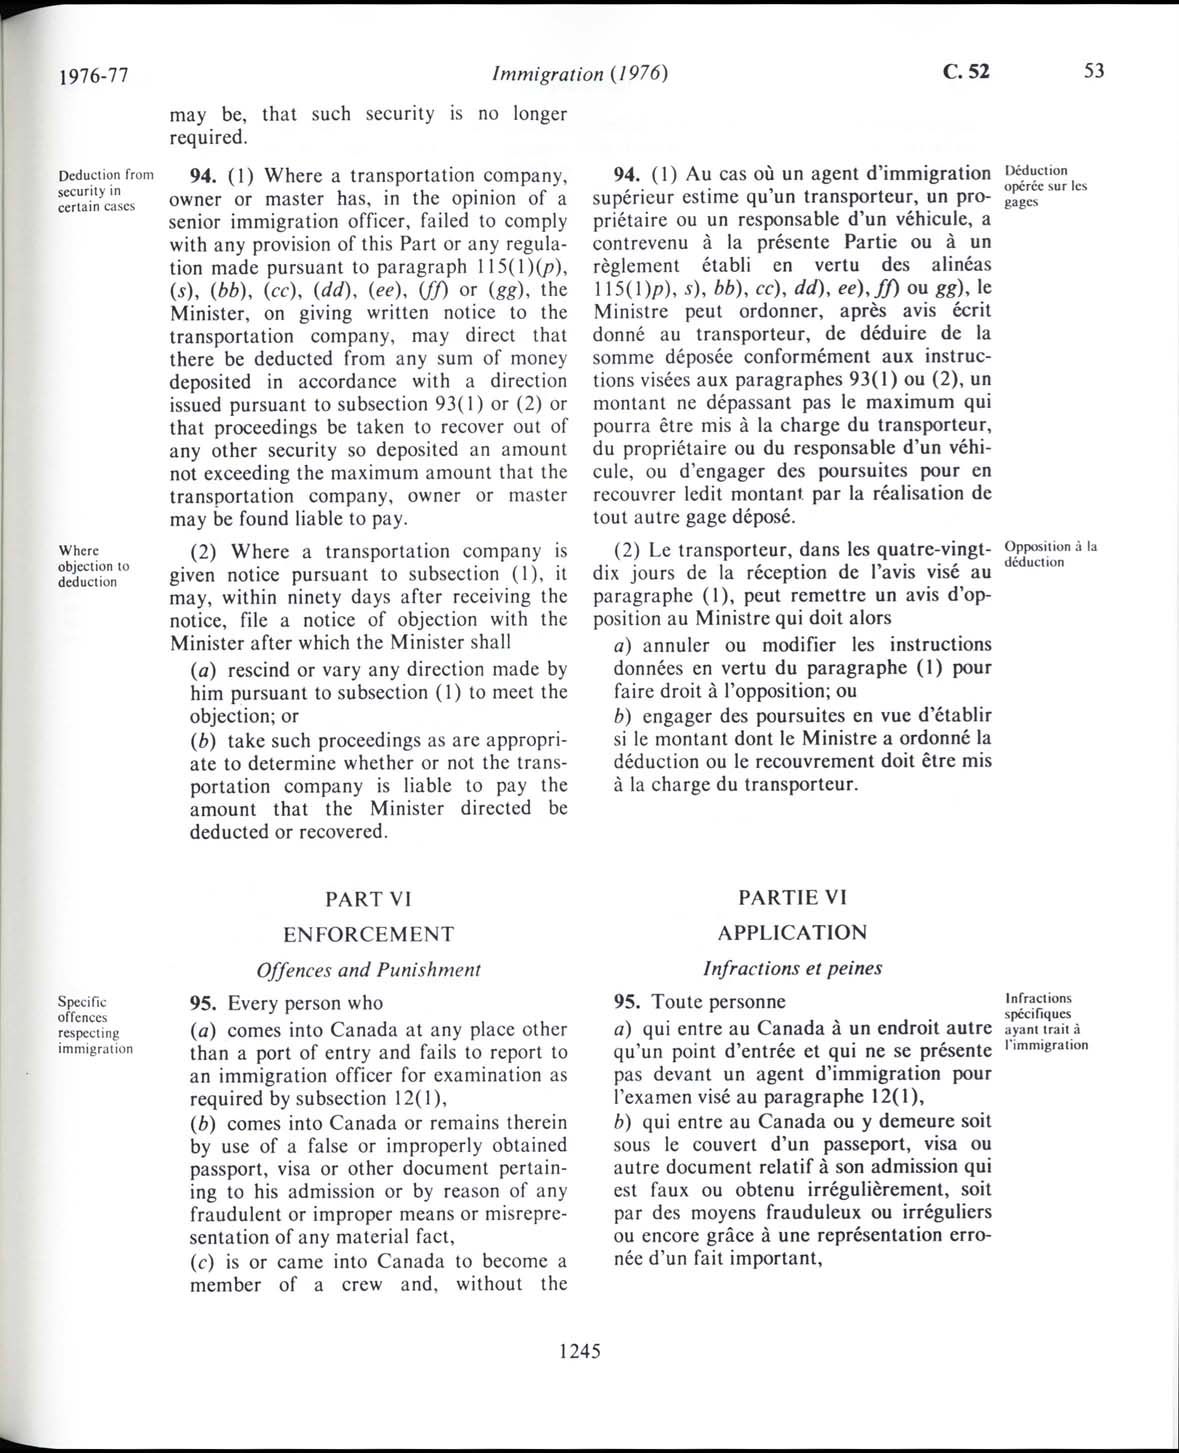 Page 1245 Immigration Act, 1976